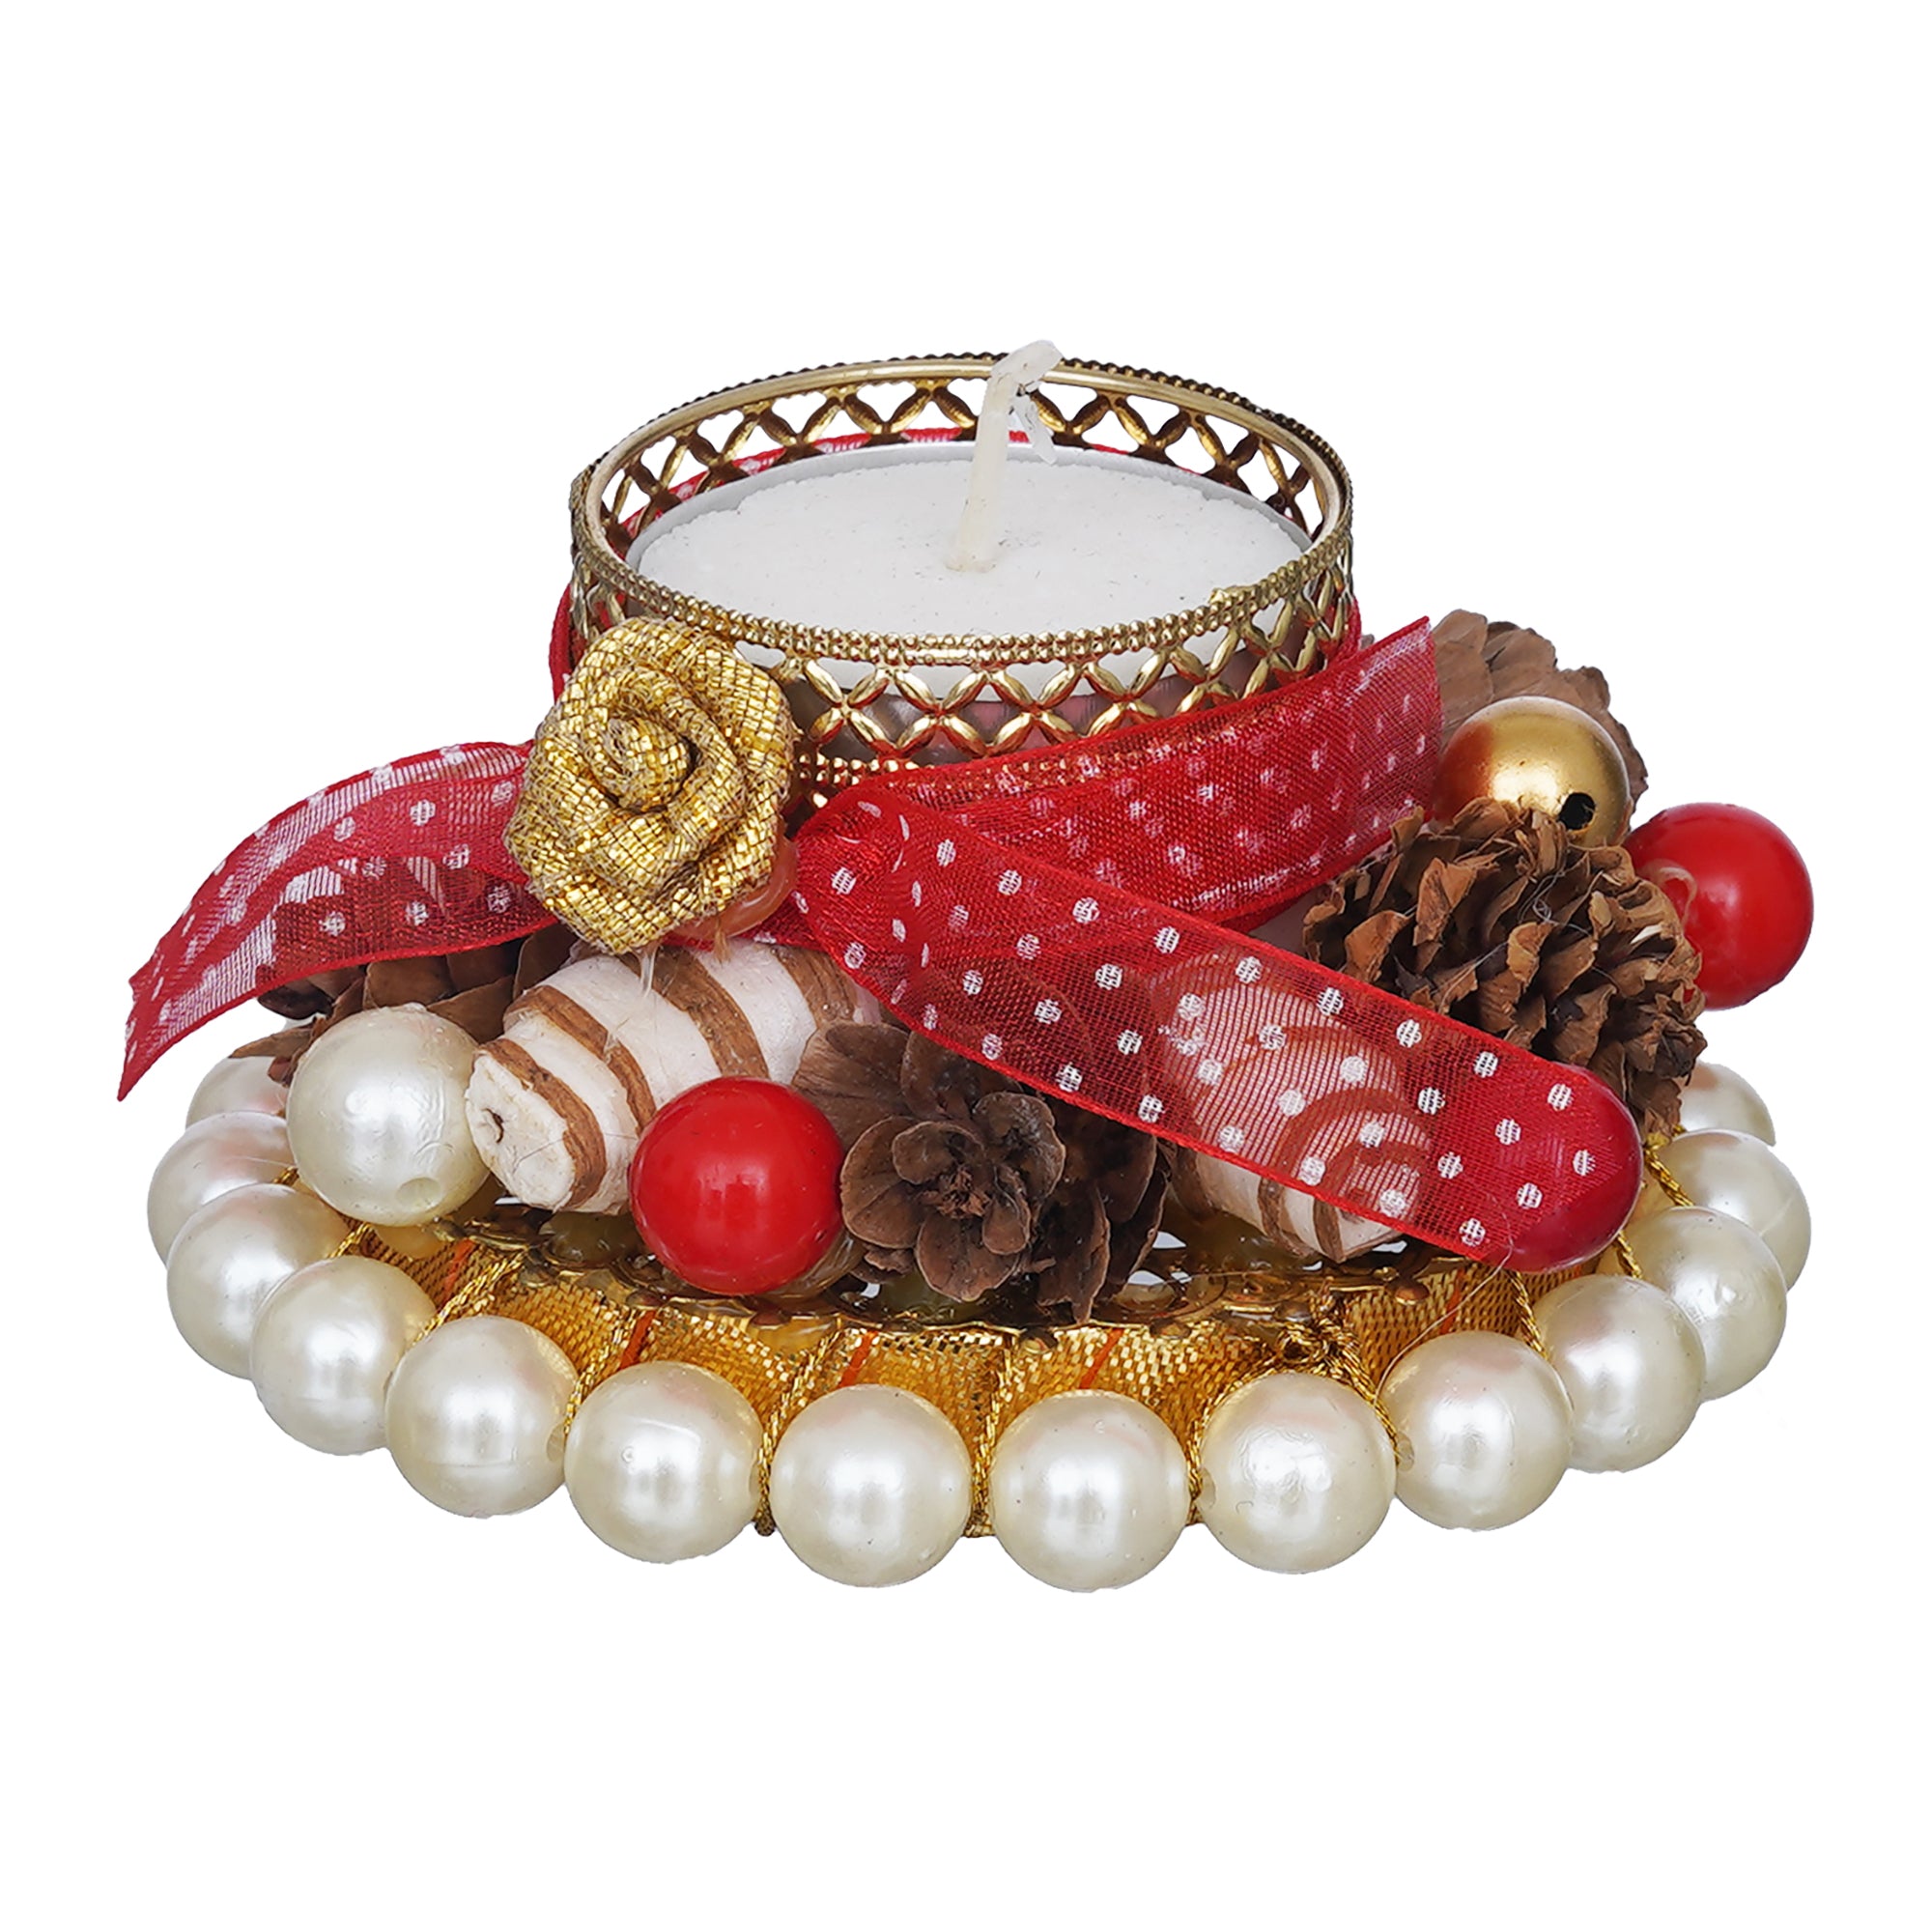 eCraftIndia Floral and Beads Decorative Tea Light Candle Holder 6